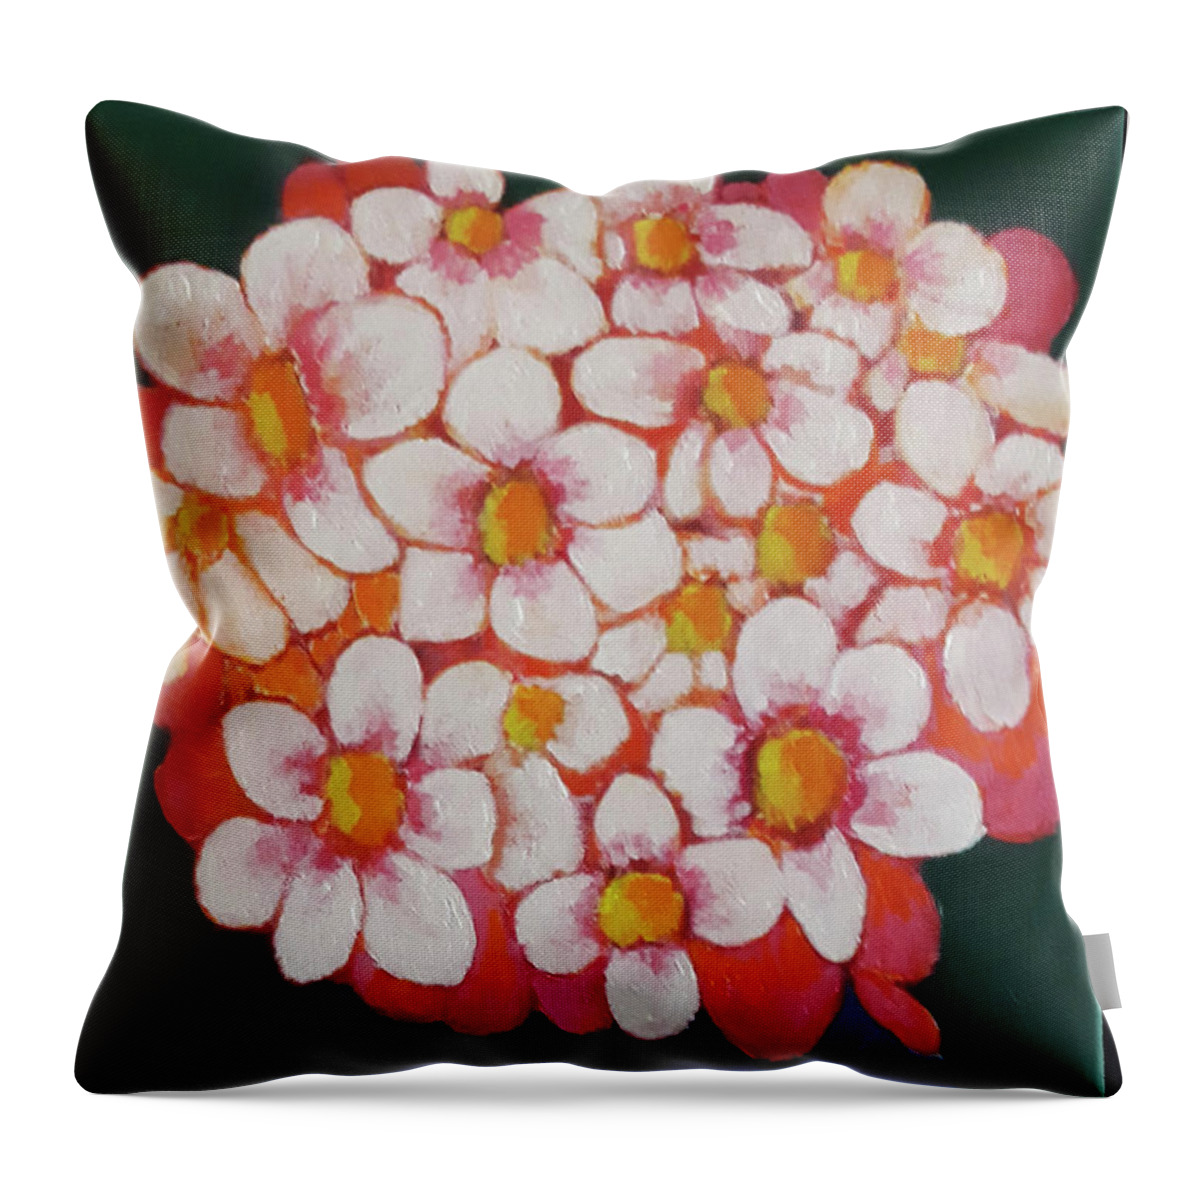 Flowers Throw Pillow featuring the painting Methaphor by Gabby Tary